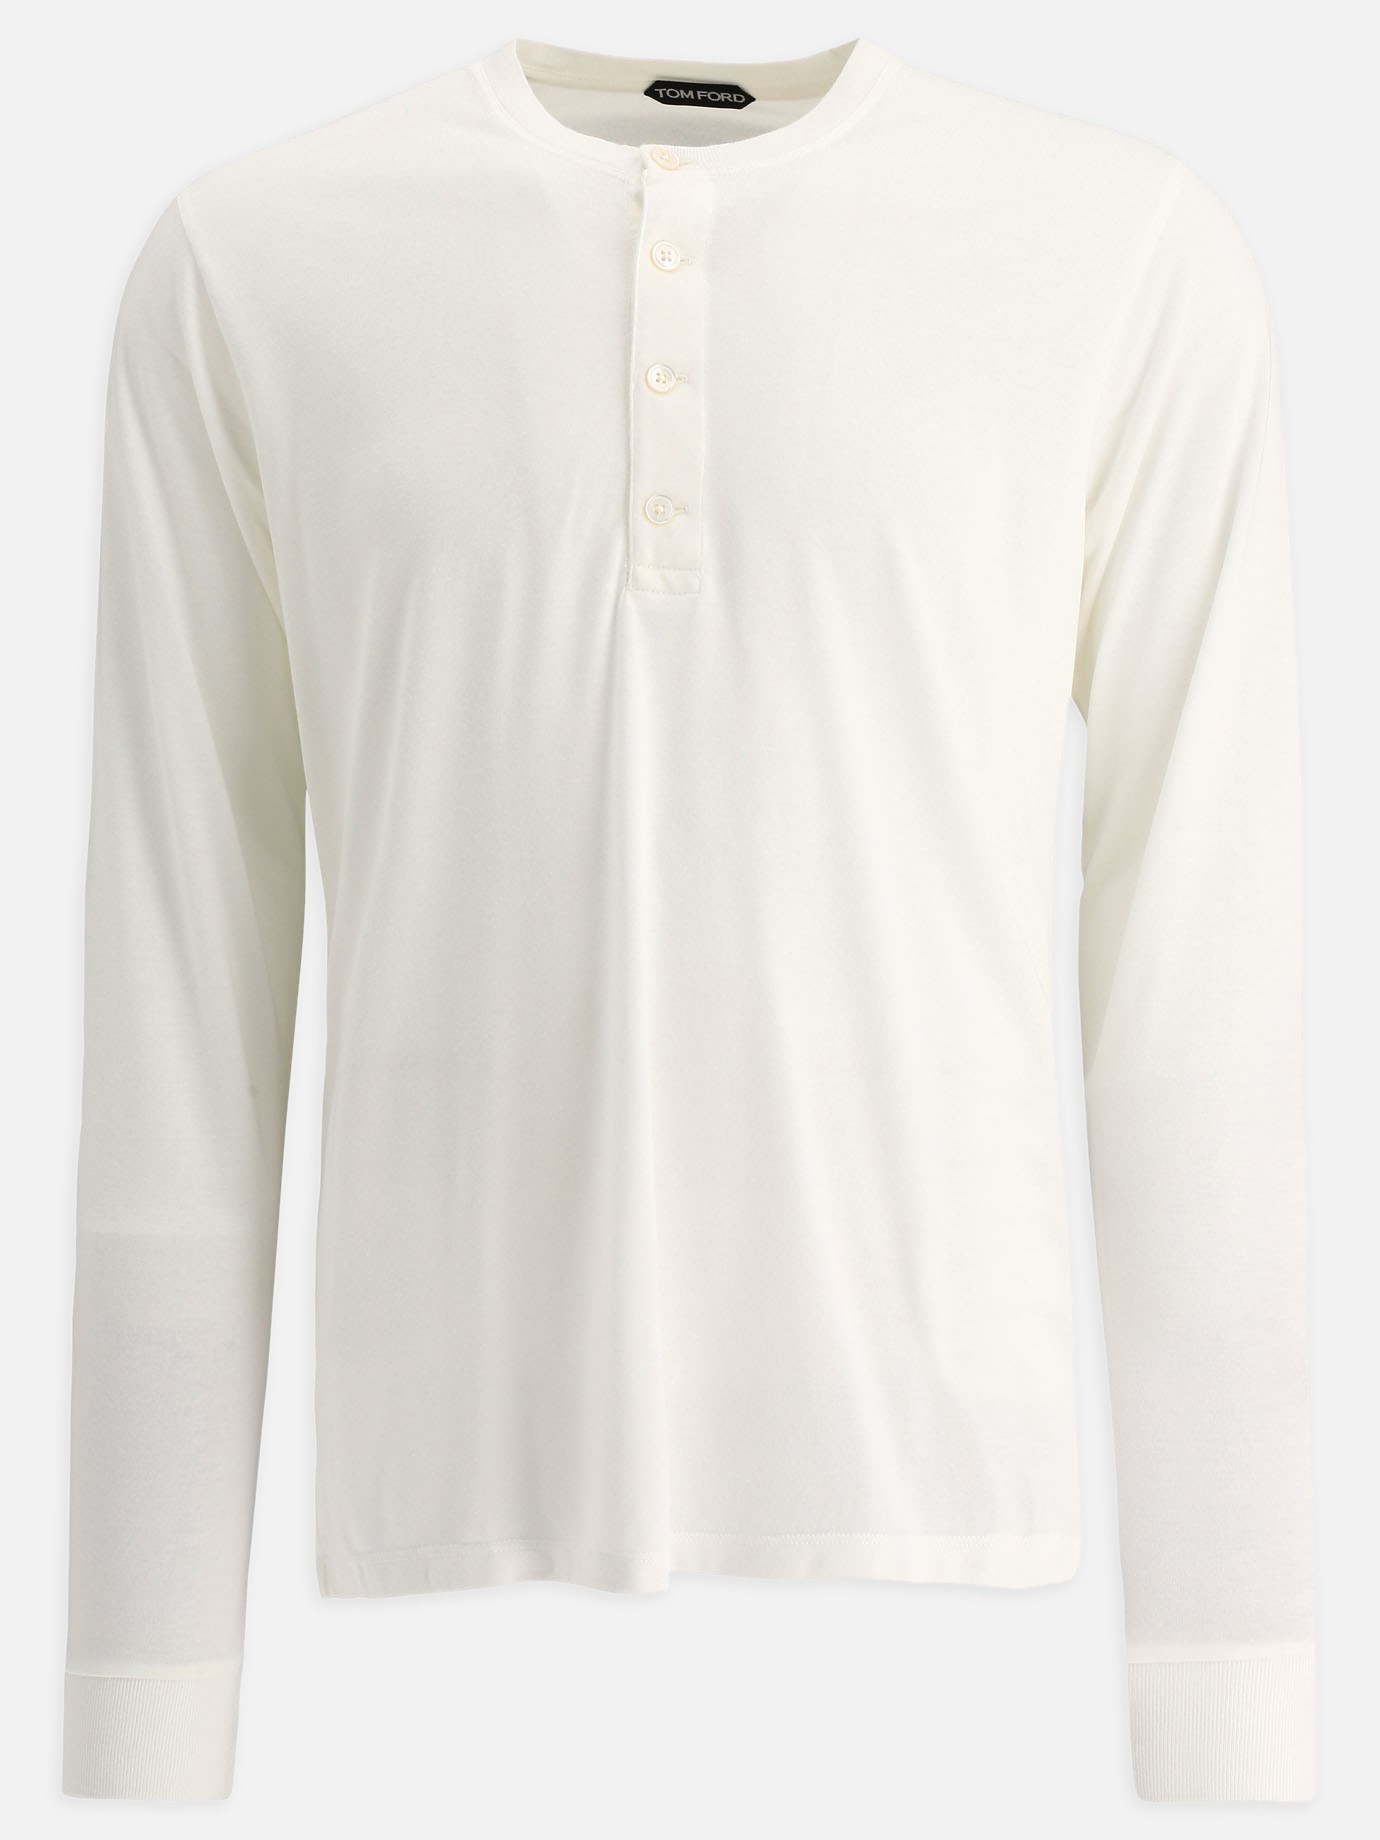  Henley  t-shirtby Tom Ford - 2